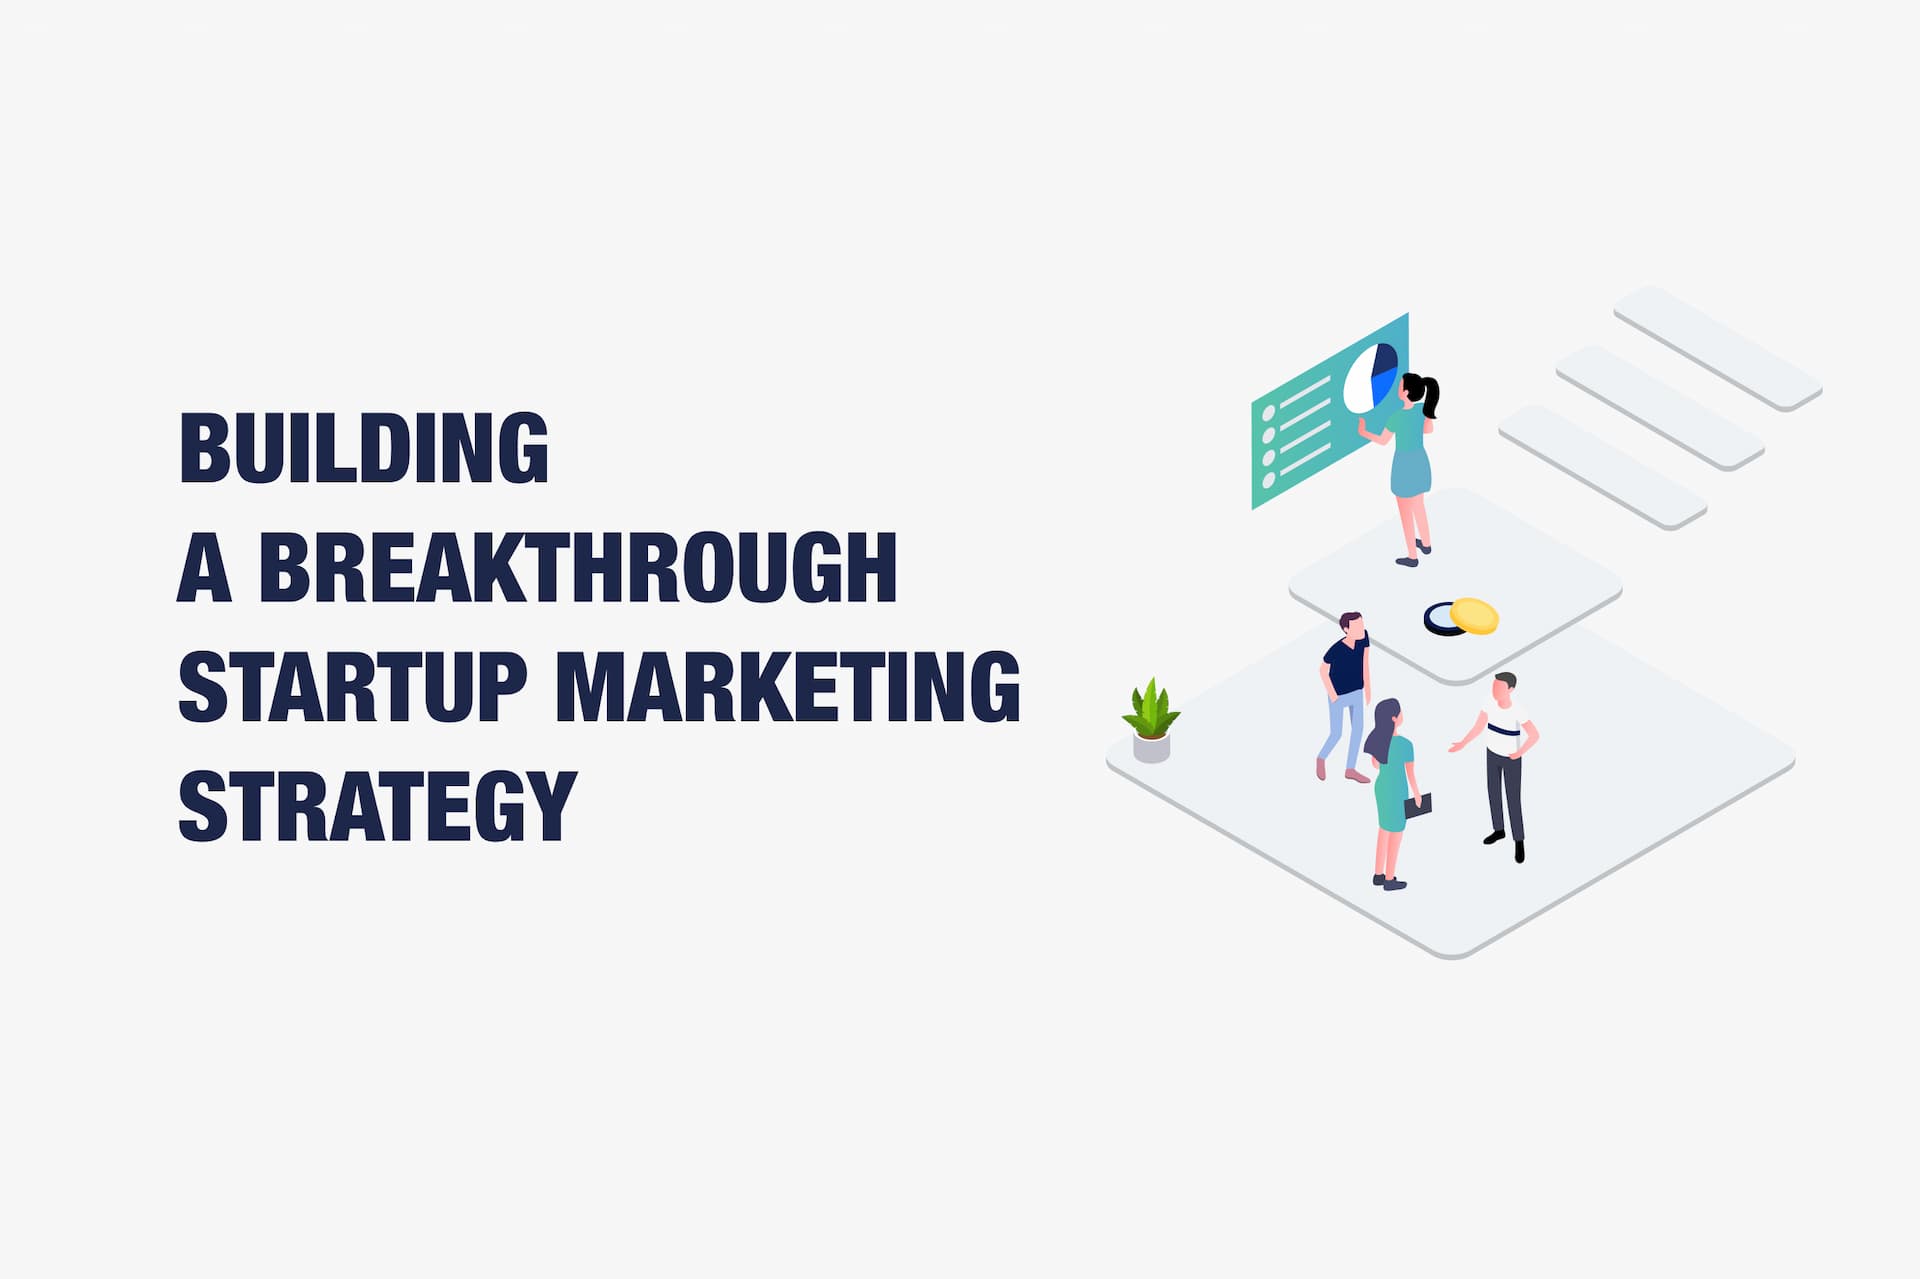 Building a Breakthrough Startup Marketing Strategy